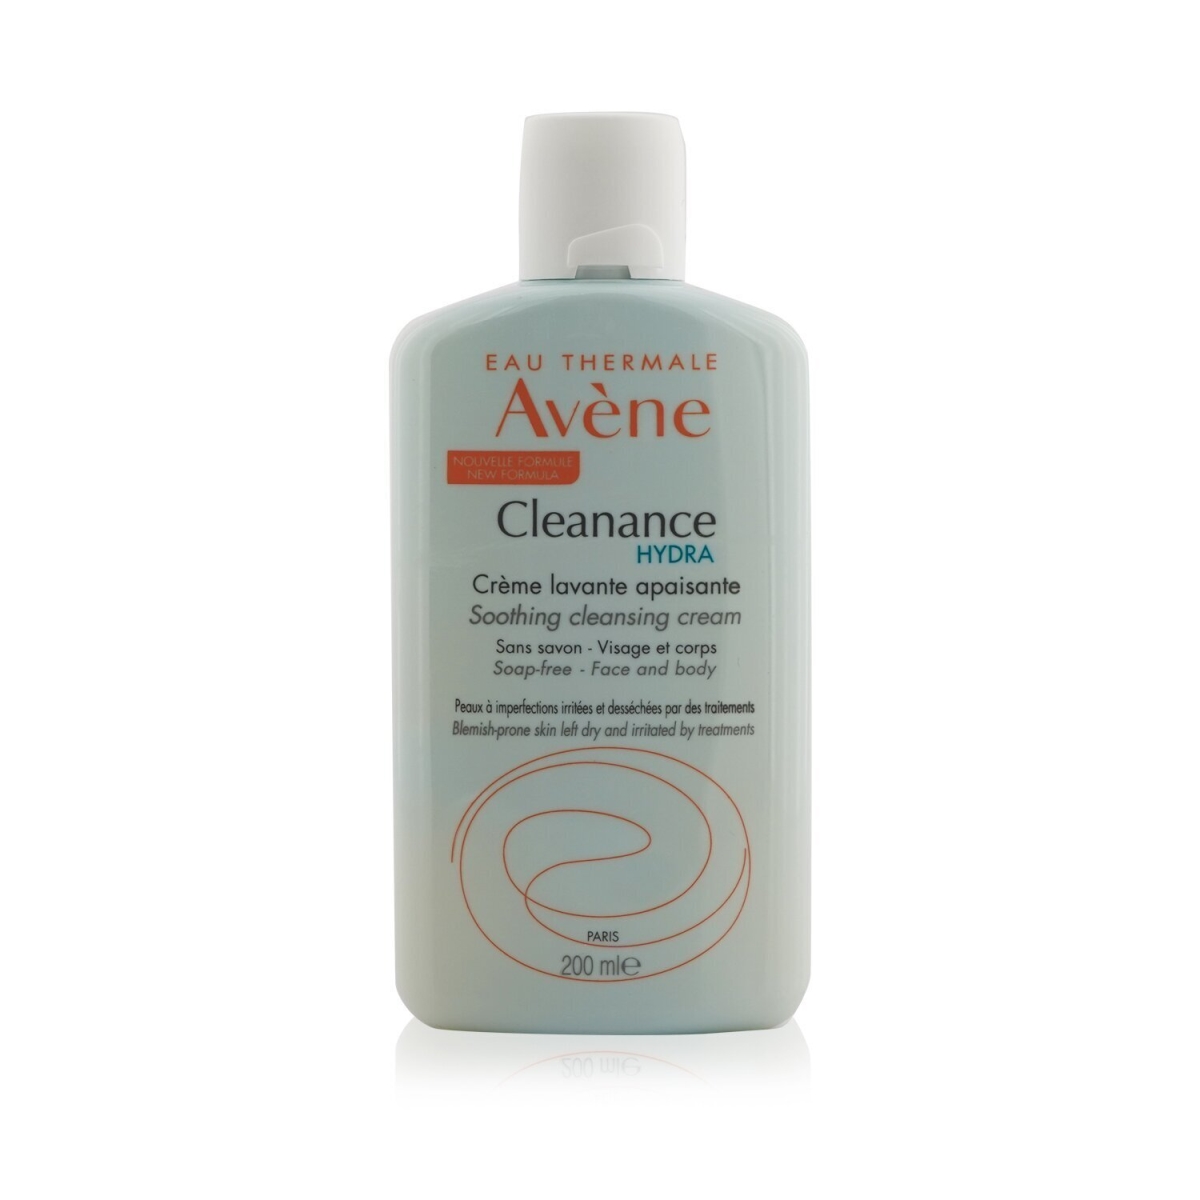 Picture of Avene 239833 6.7 oz Cleanance HYDRA Soothing Cleansing Cream for Blemish-Prone Skin Left Dry & Irritated by Treatments